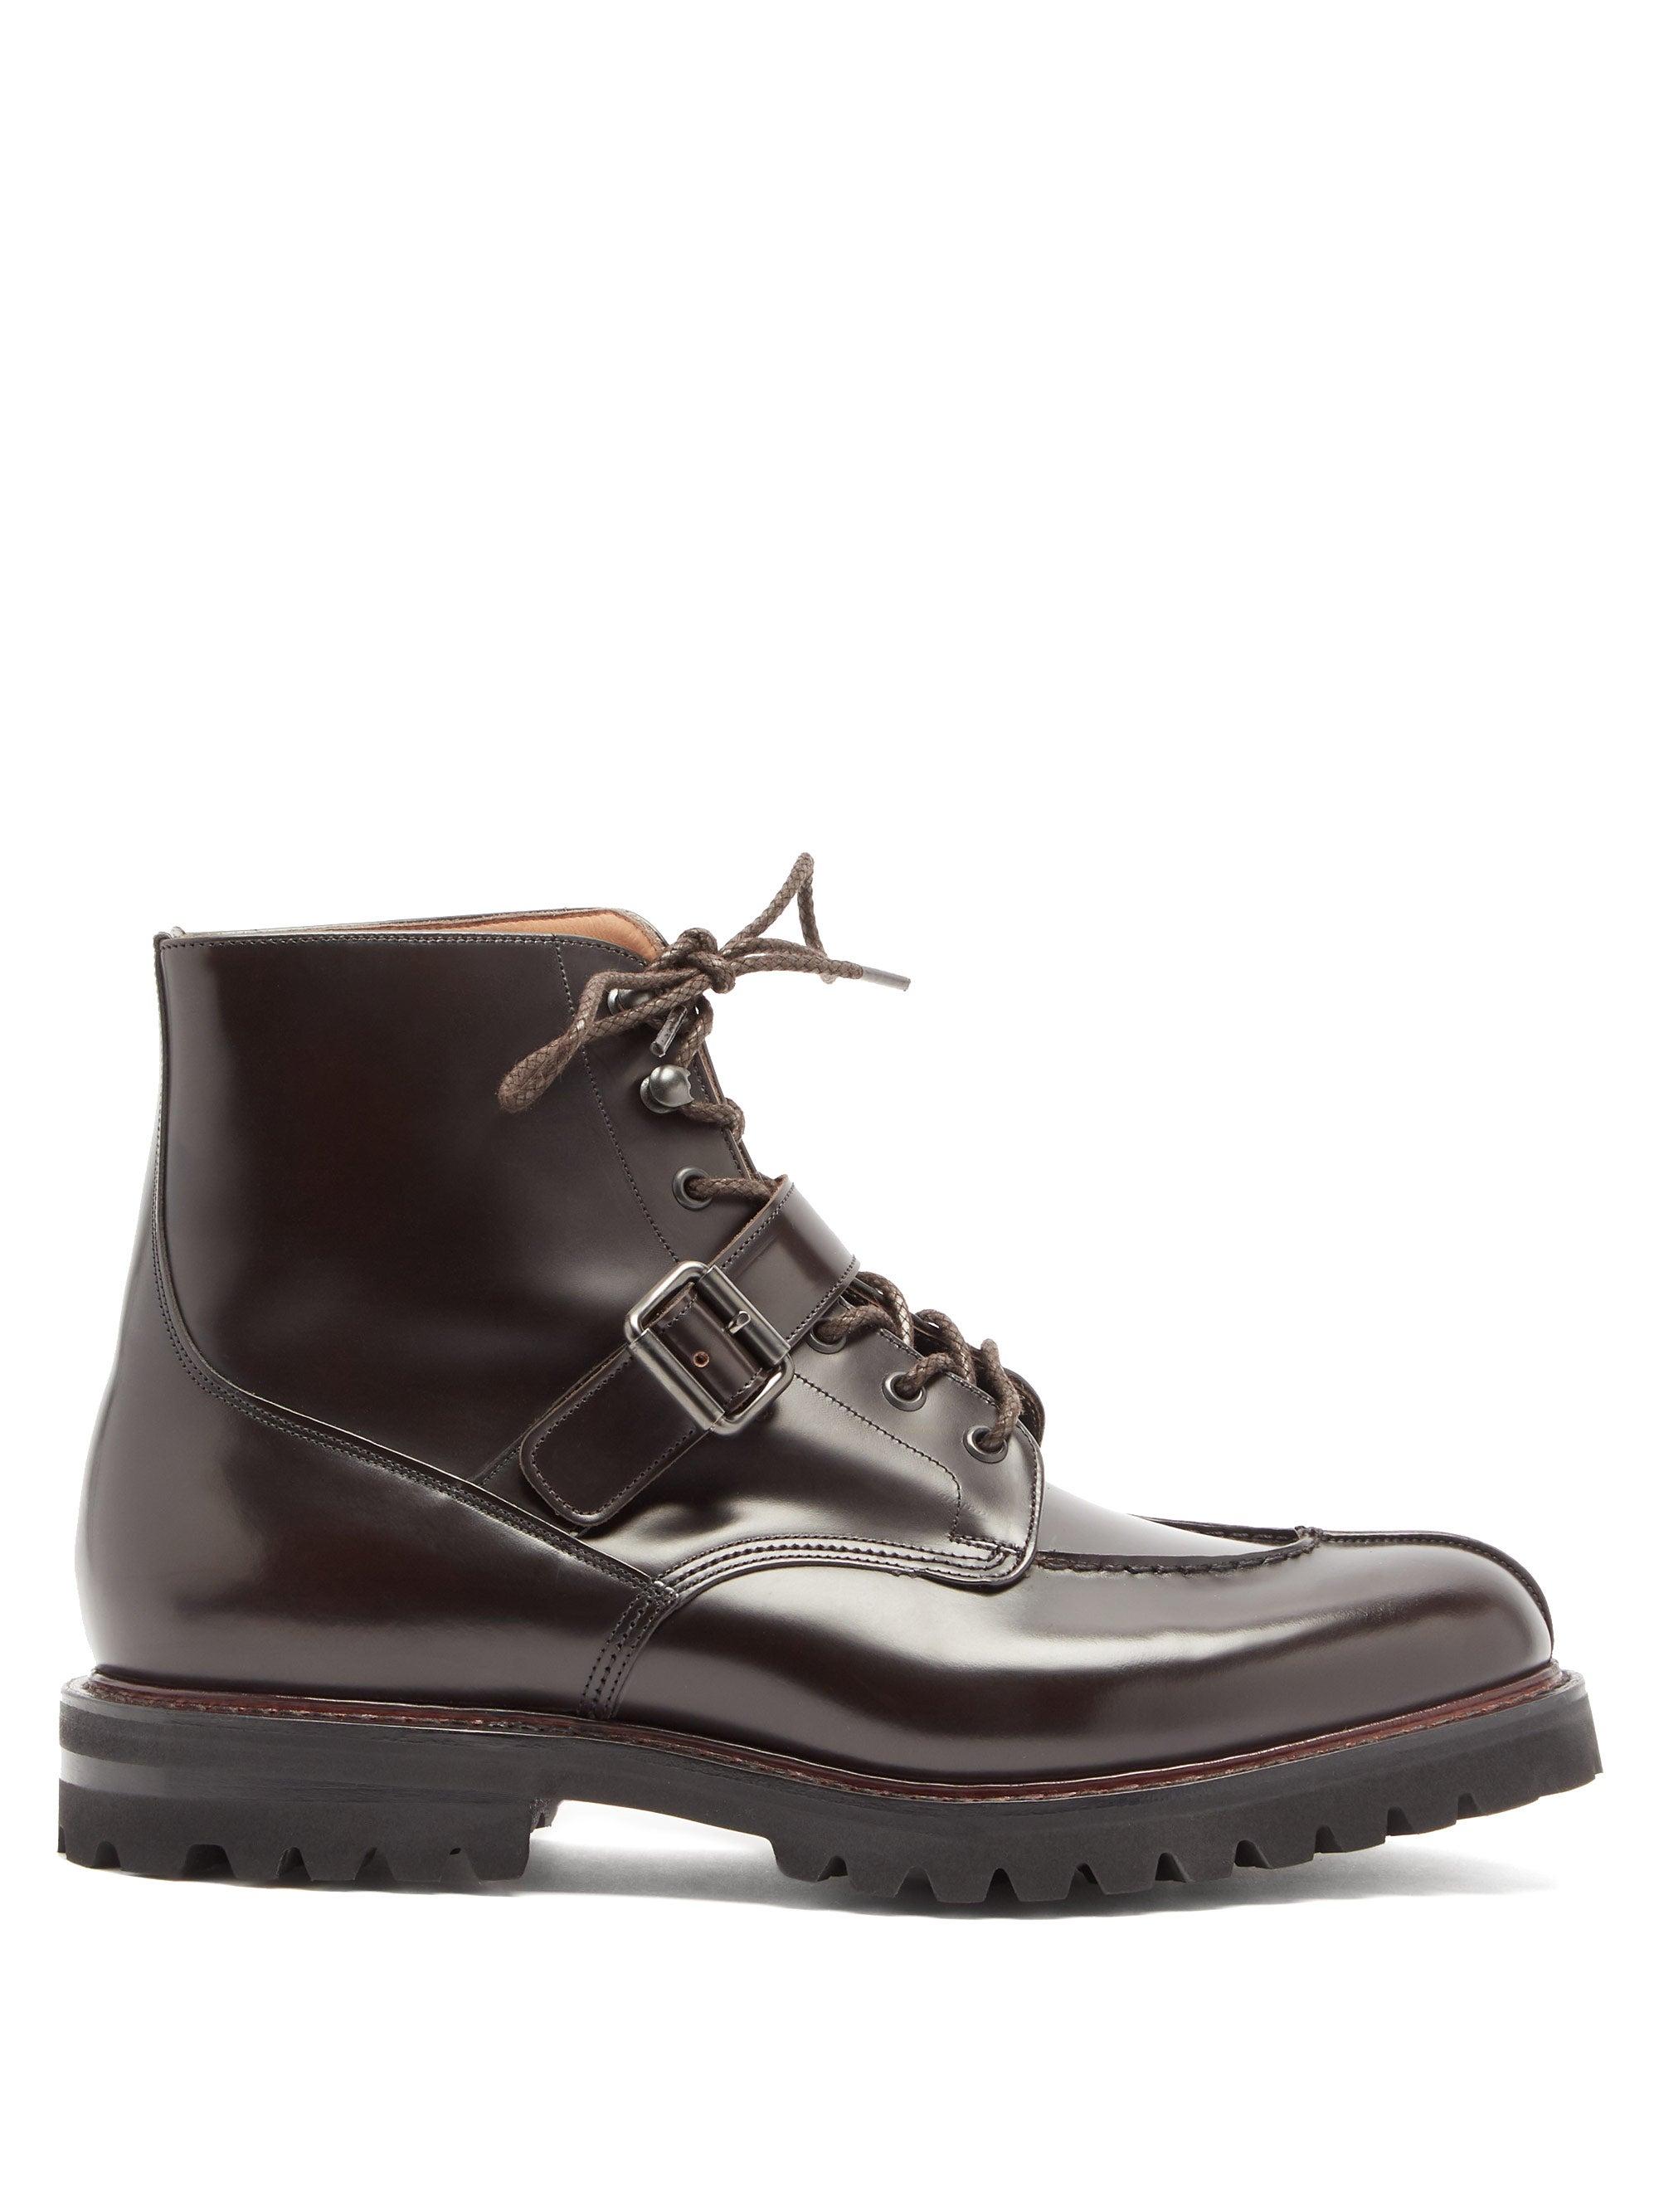 Church's Edford Buckle-strap Polished-leather Boots for Men - Lyst